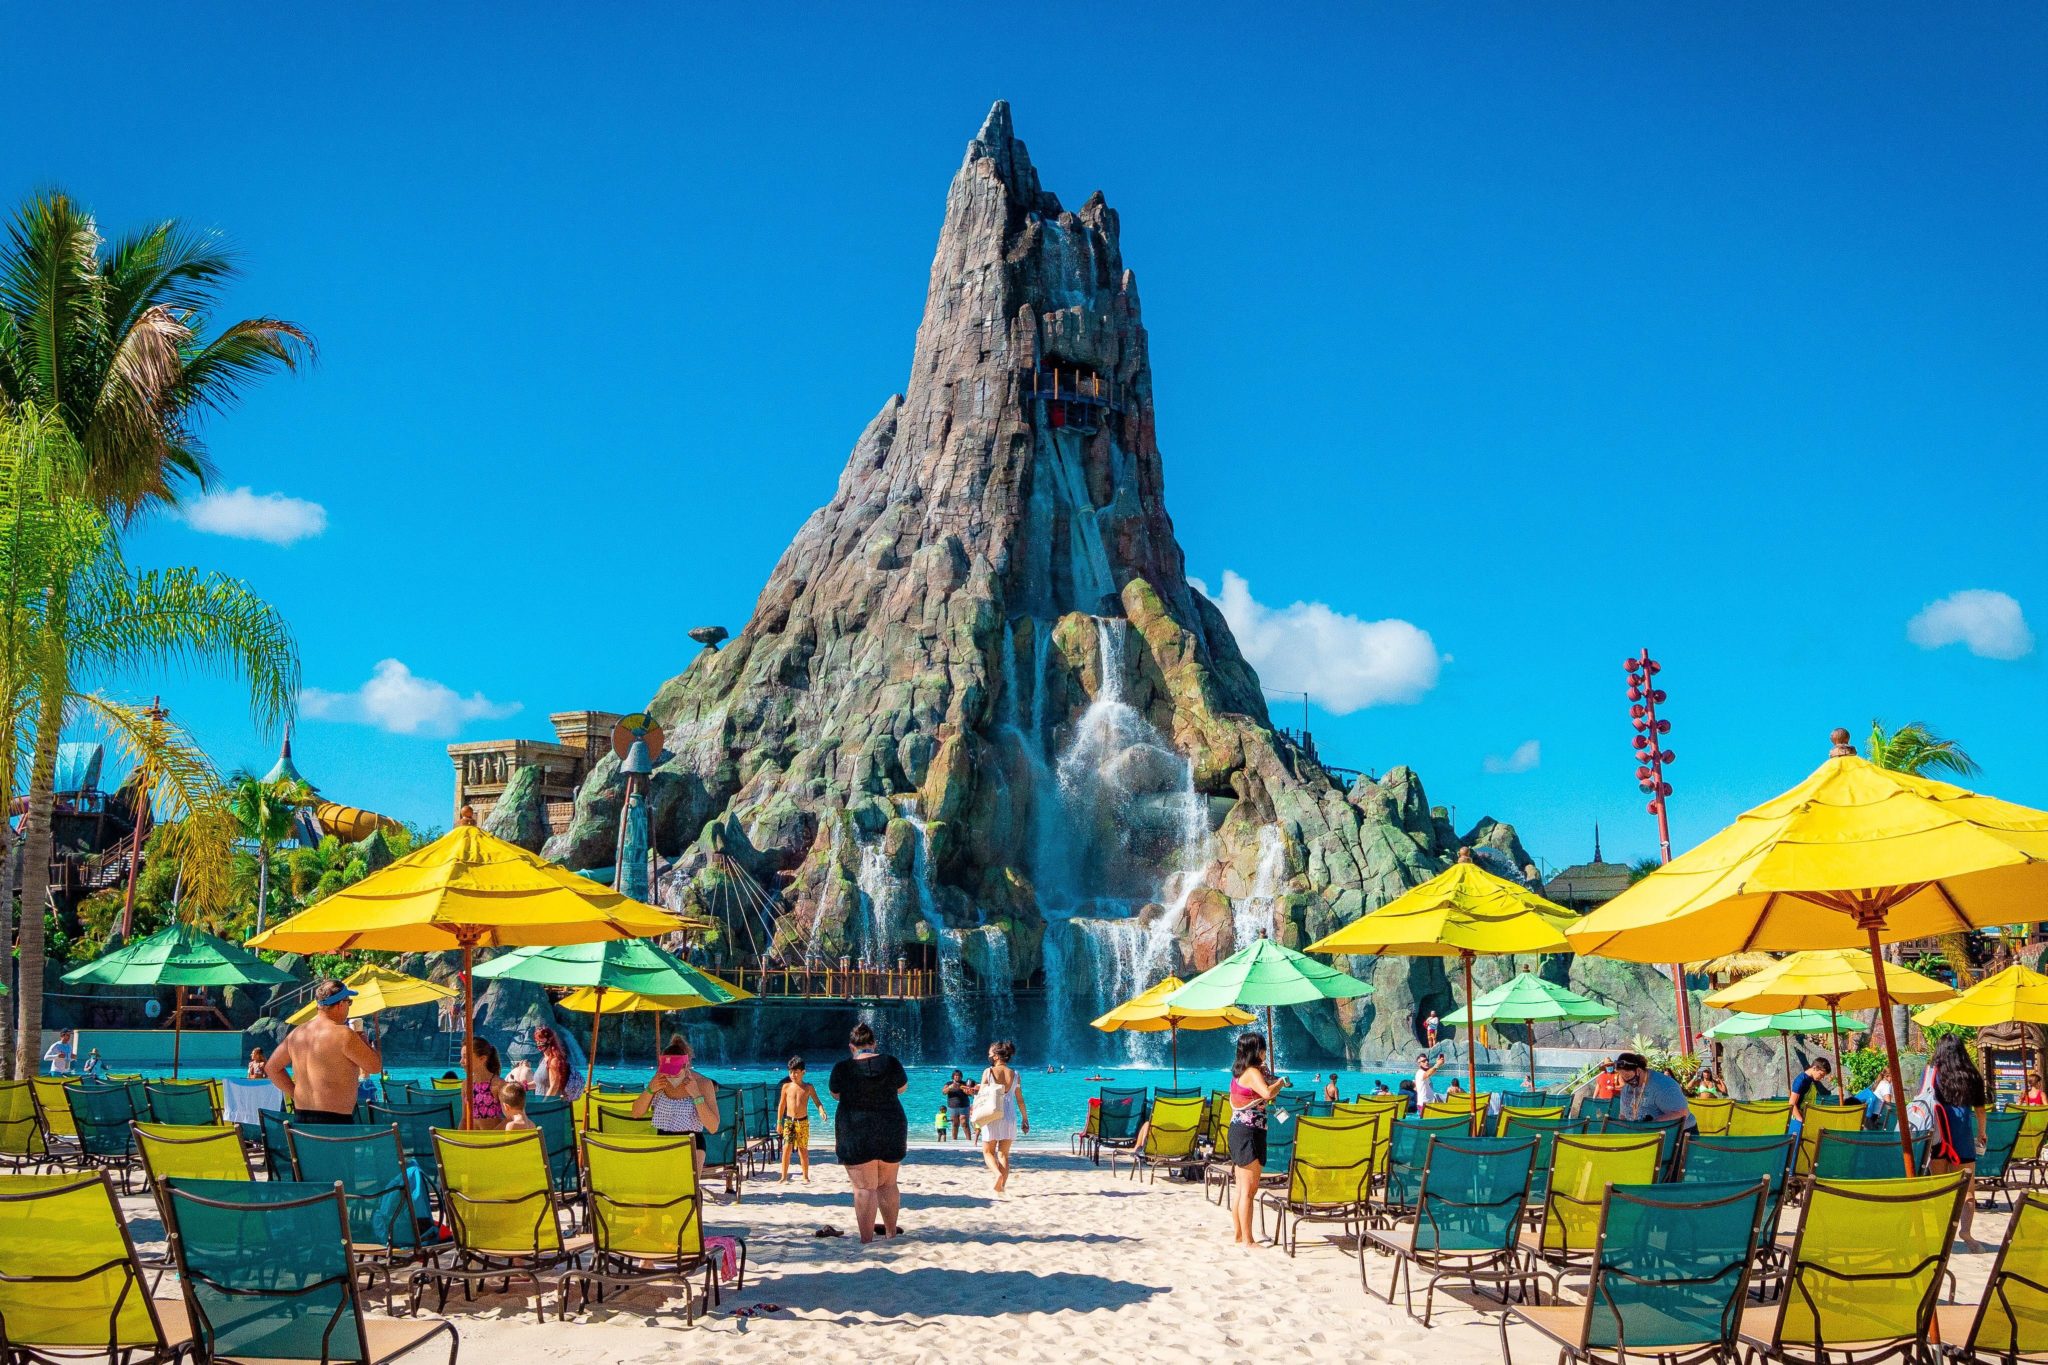 Our first day back to Universal’s Volcano Bay – Orlando Homes Blog